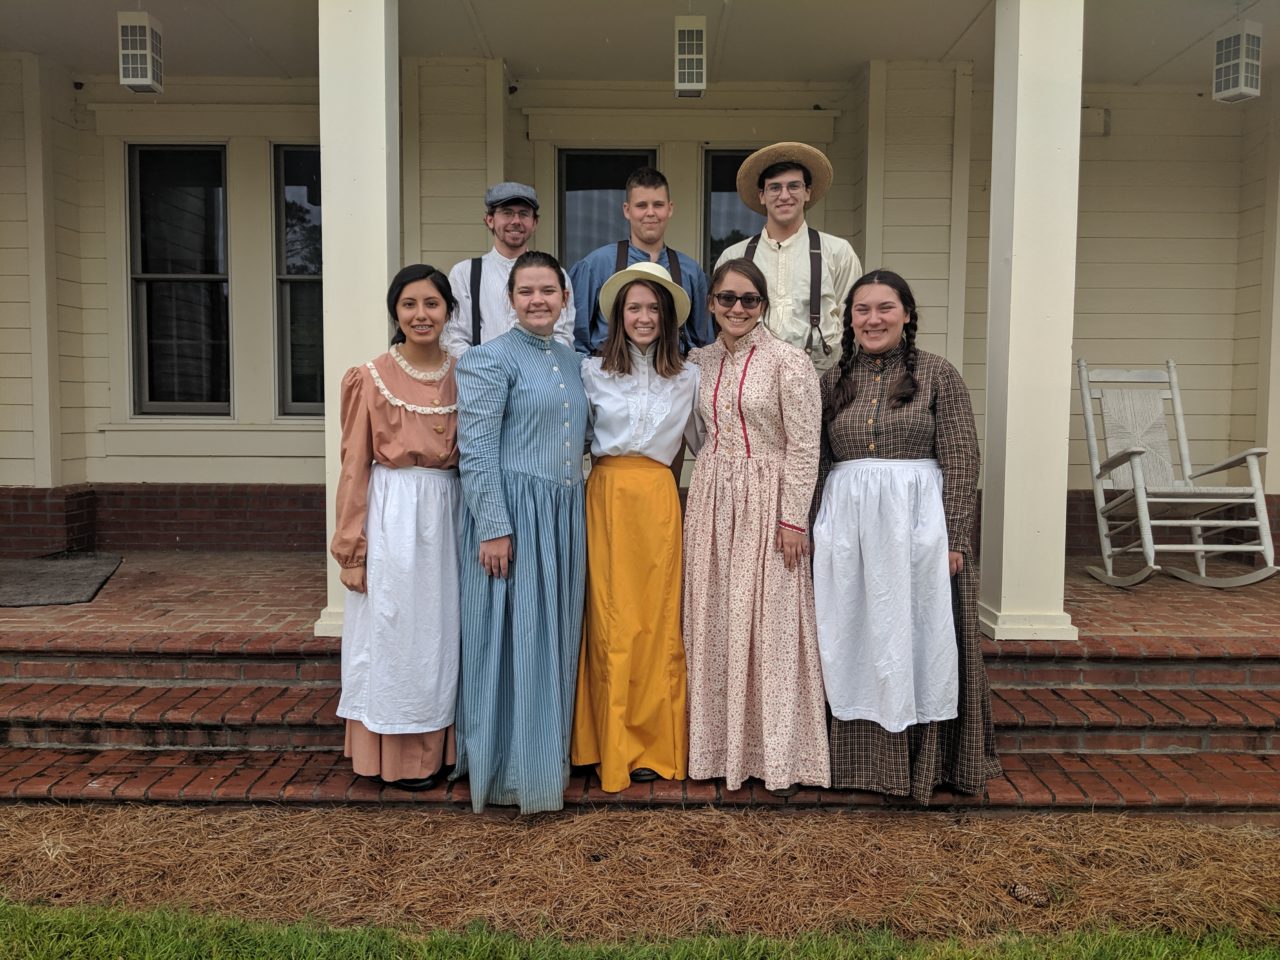 ABAC’s Georgia Museum of Agriculture Launches Summer 2022 Youth Volunteer Program